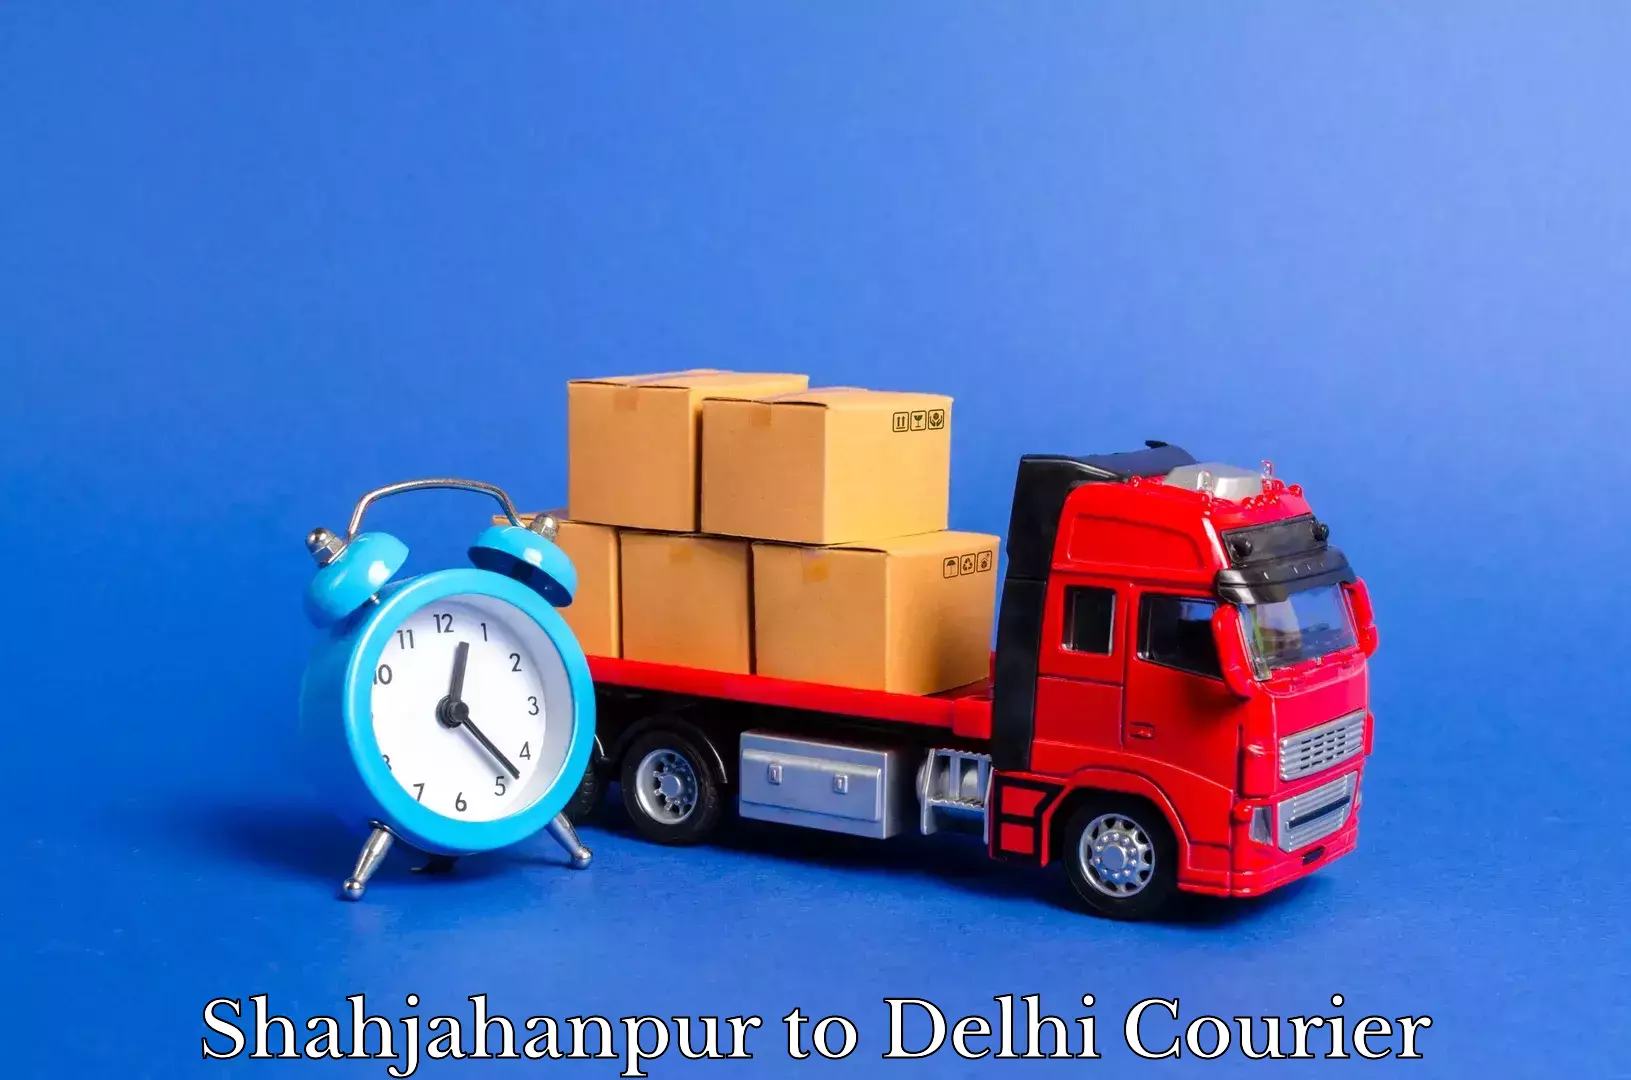 Budget-friendly movers Shahjahanpur to University of Delhi